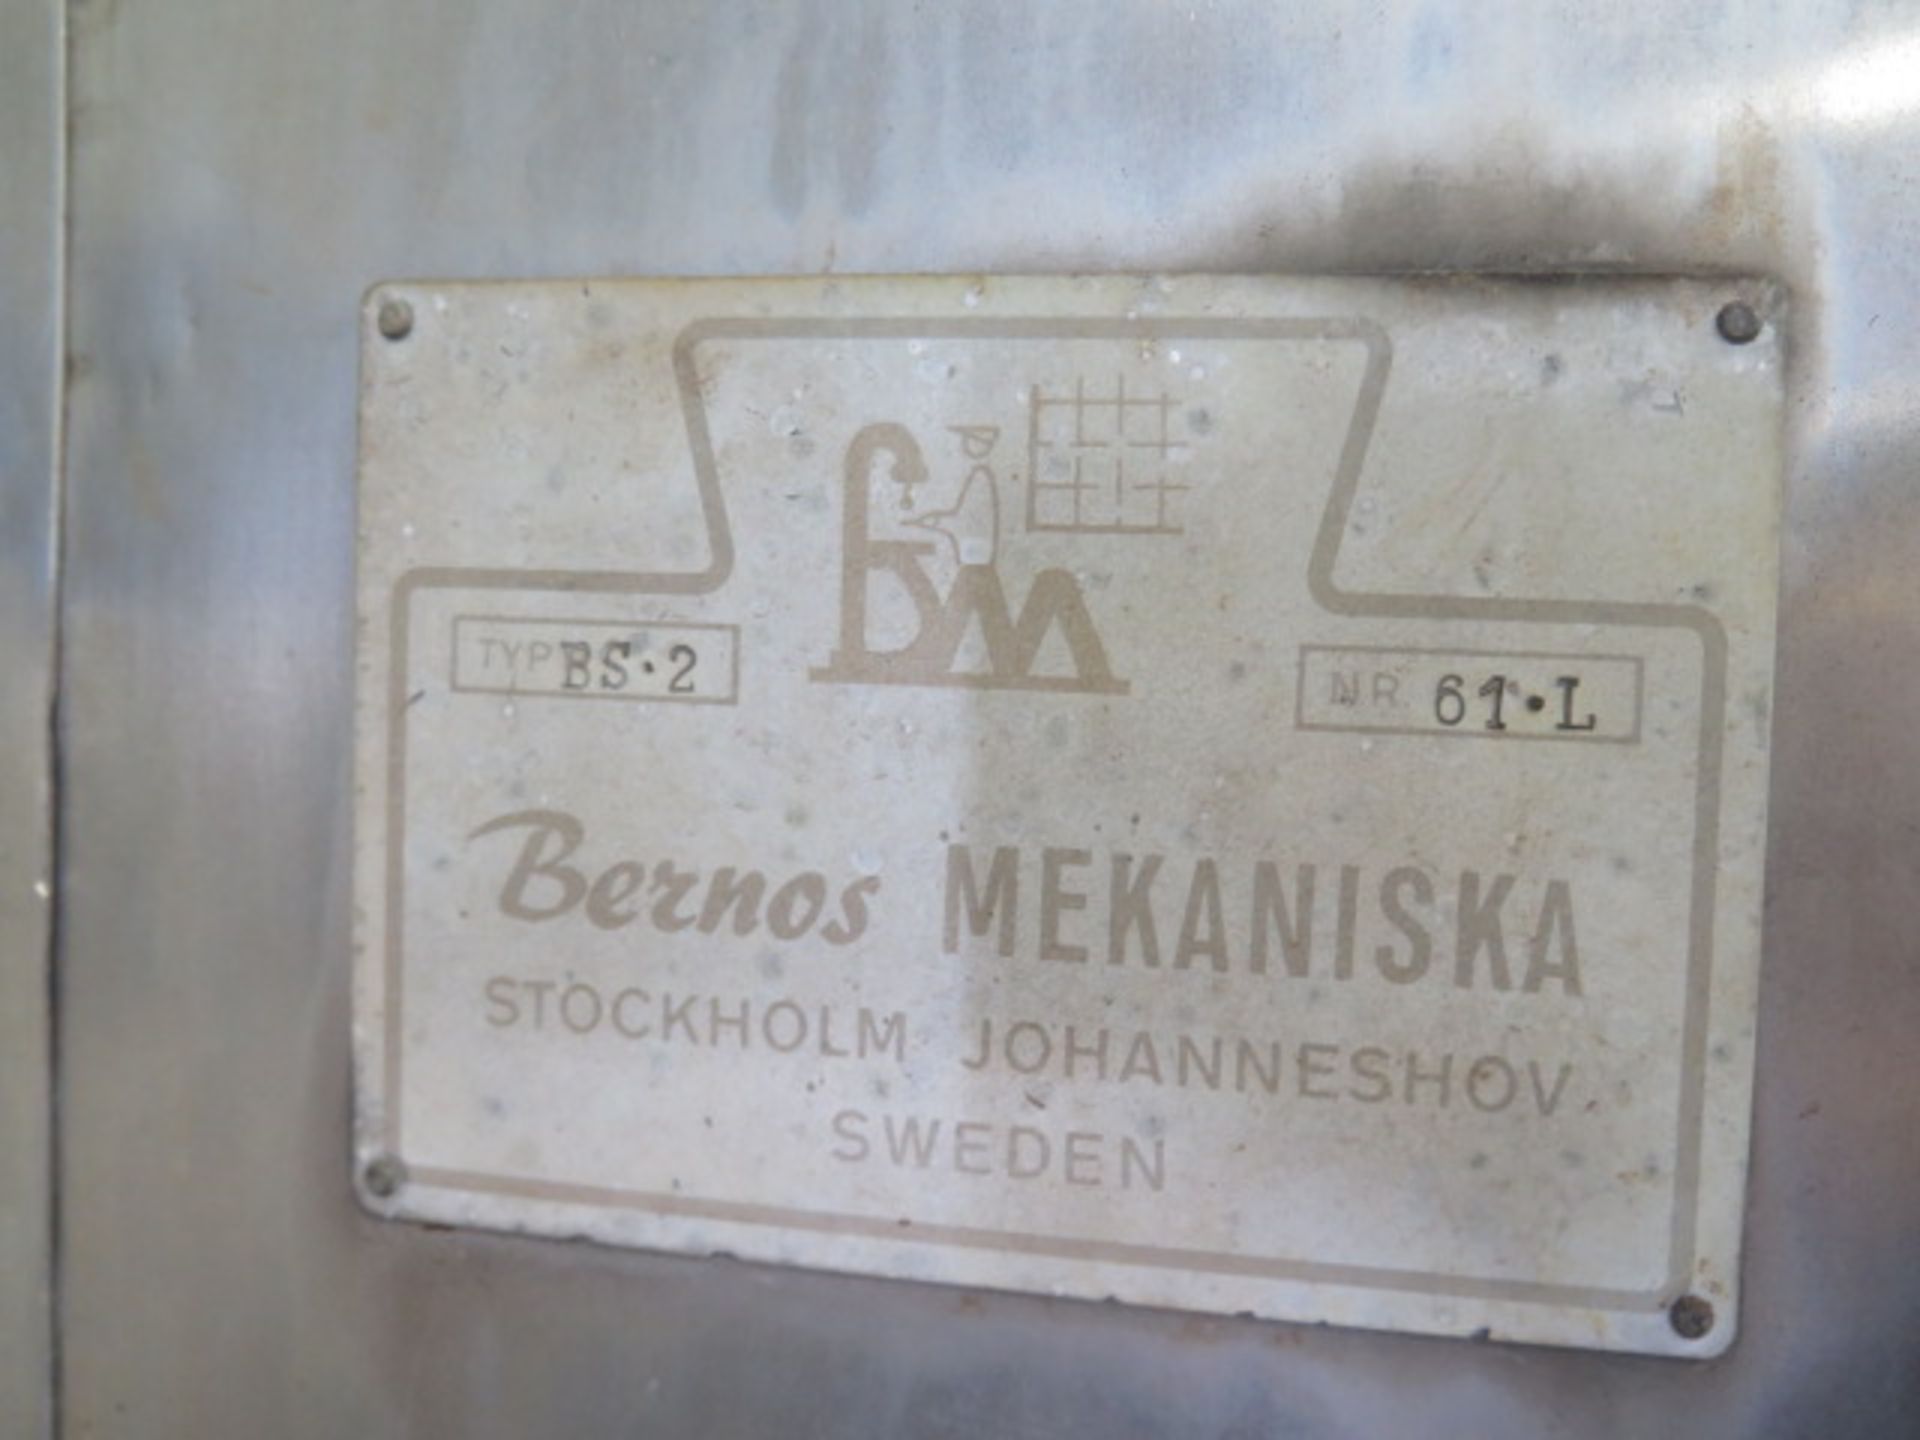 Bernos Mekaniska BS-2 34” Vertical Band Saw s/n 61-L w/ 61” x 45” Table (SOLD AS-IS - NO WARRANTY) - Image 6 of 6